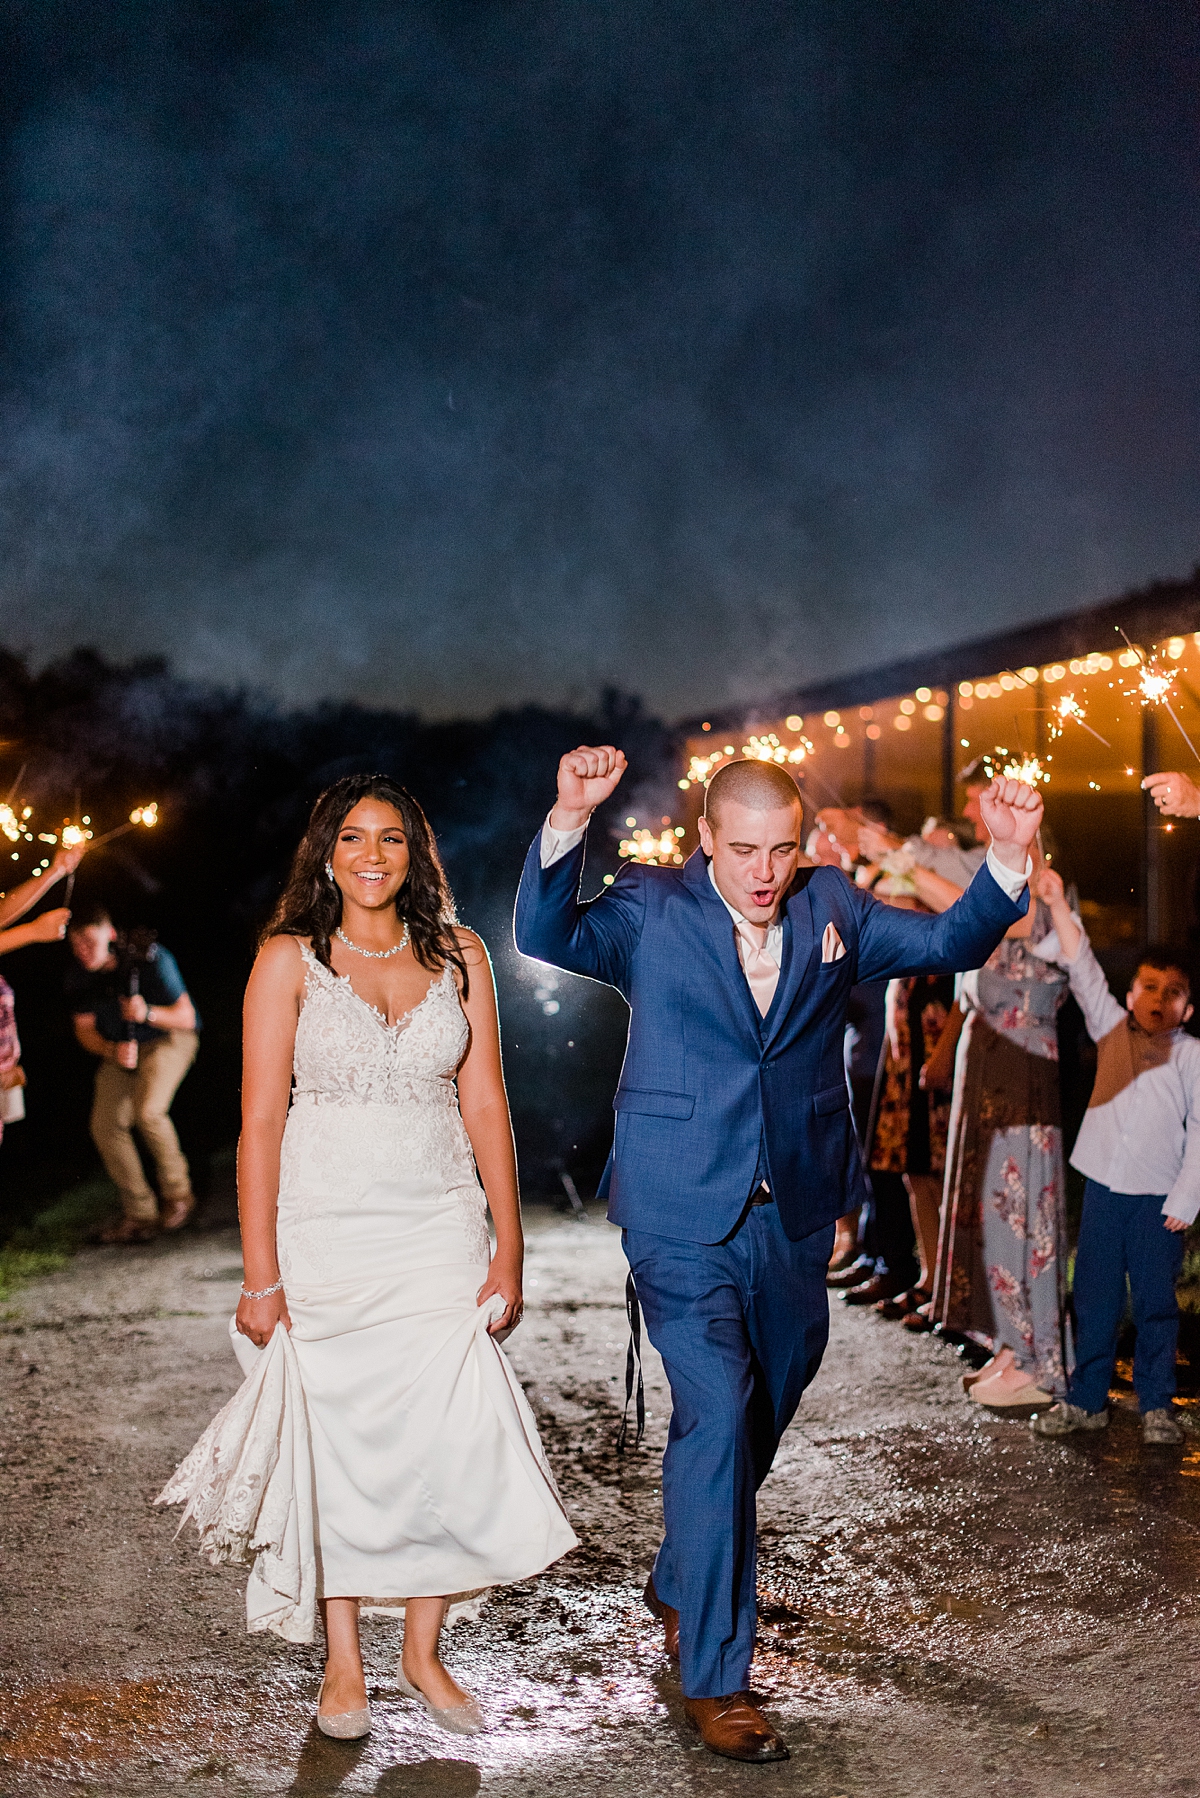 Sparkler Exit at Arbor Haven Summer Wedding Reception. Wedding Photography by Richmond Wedding Photographer Kailey Brianne Photography. 